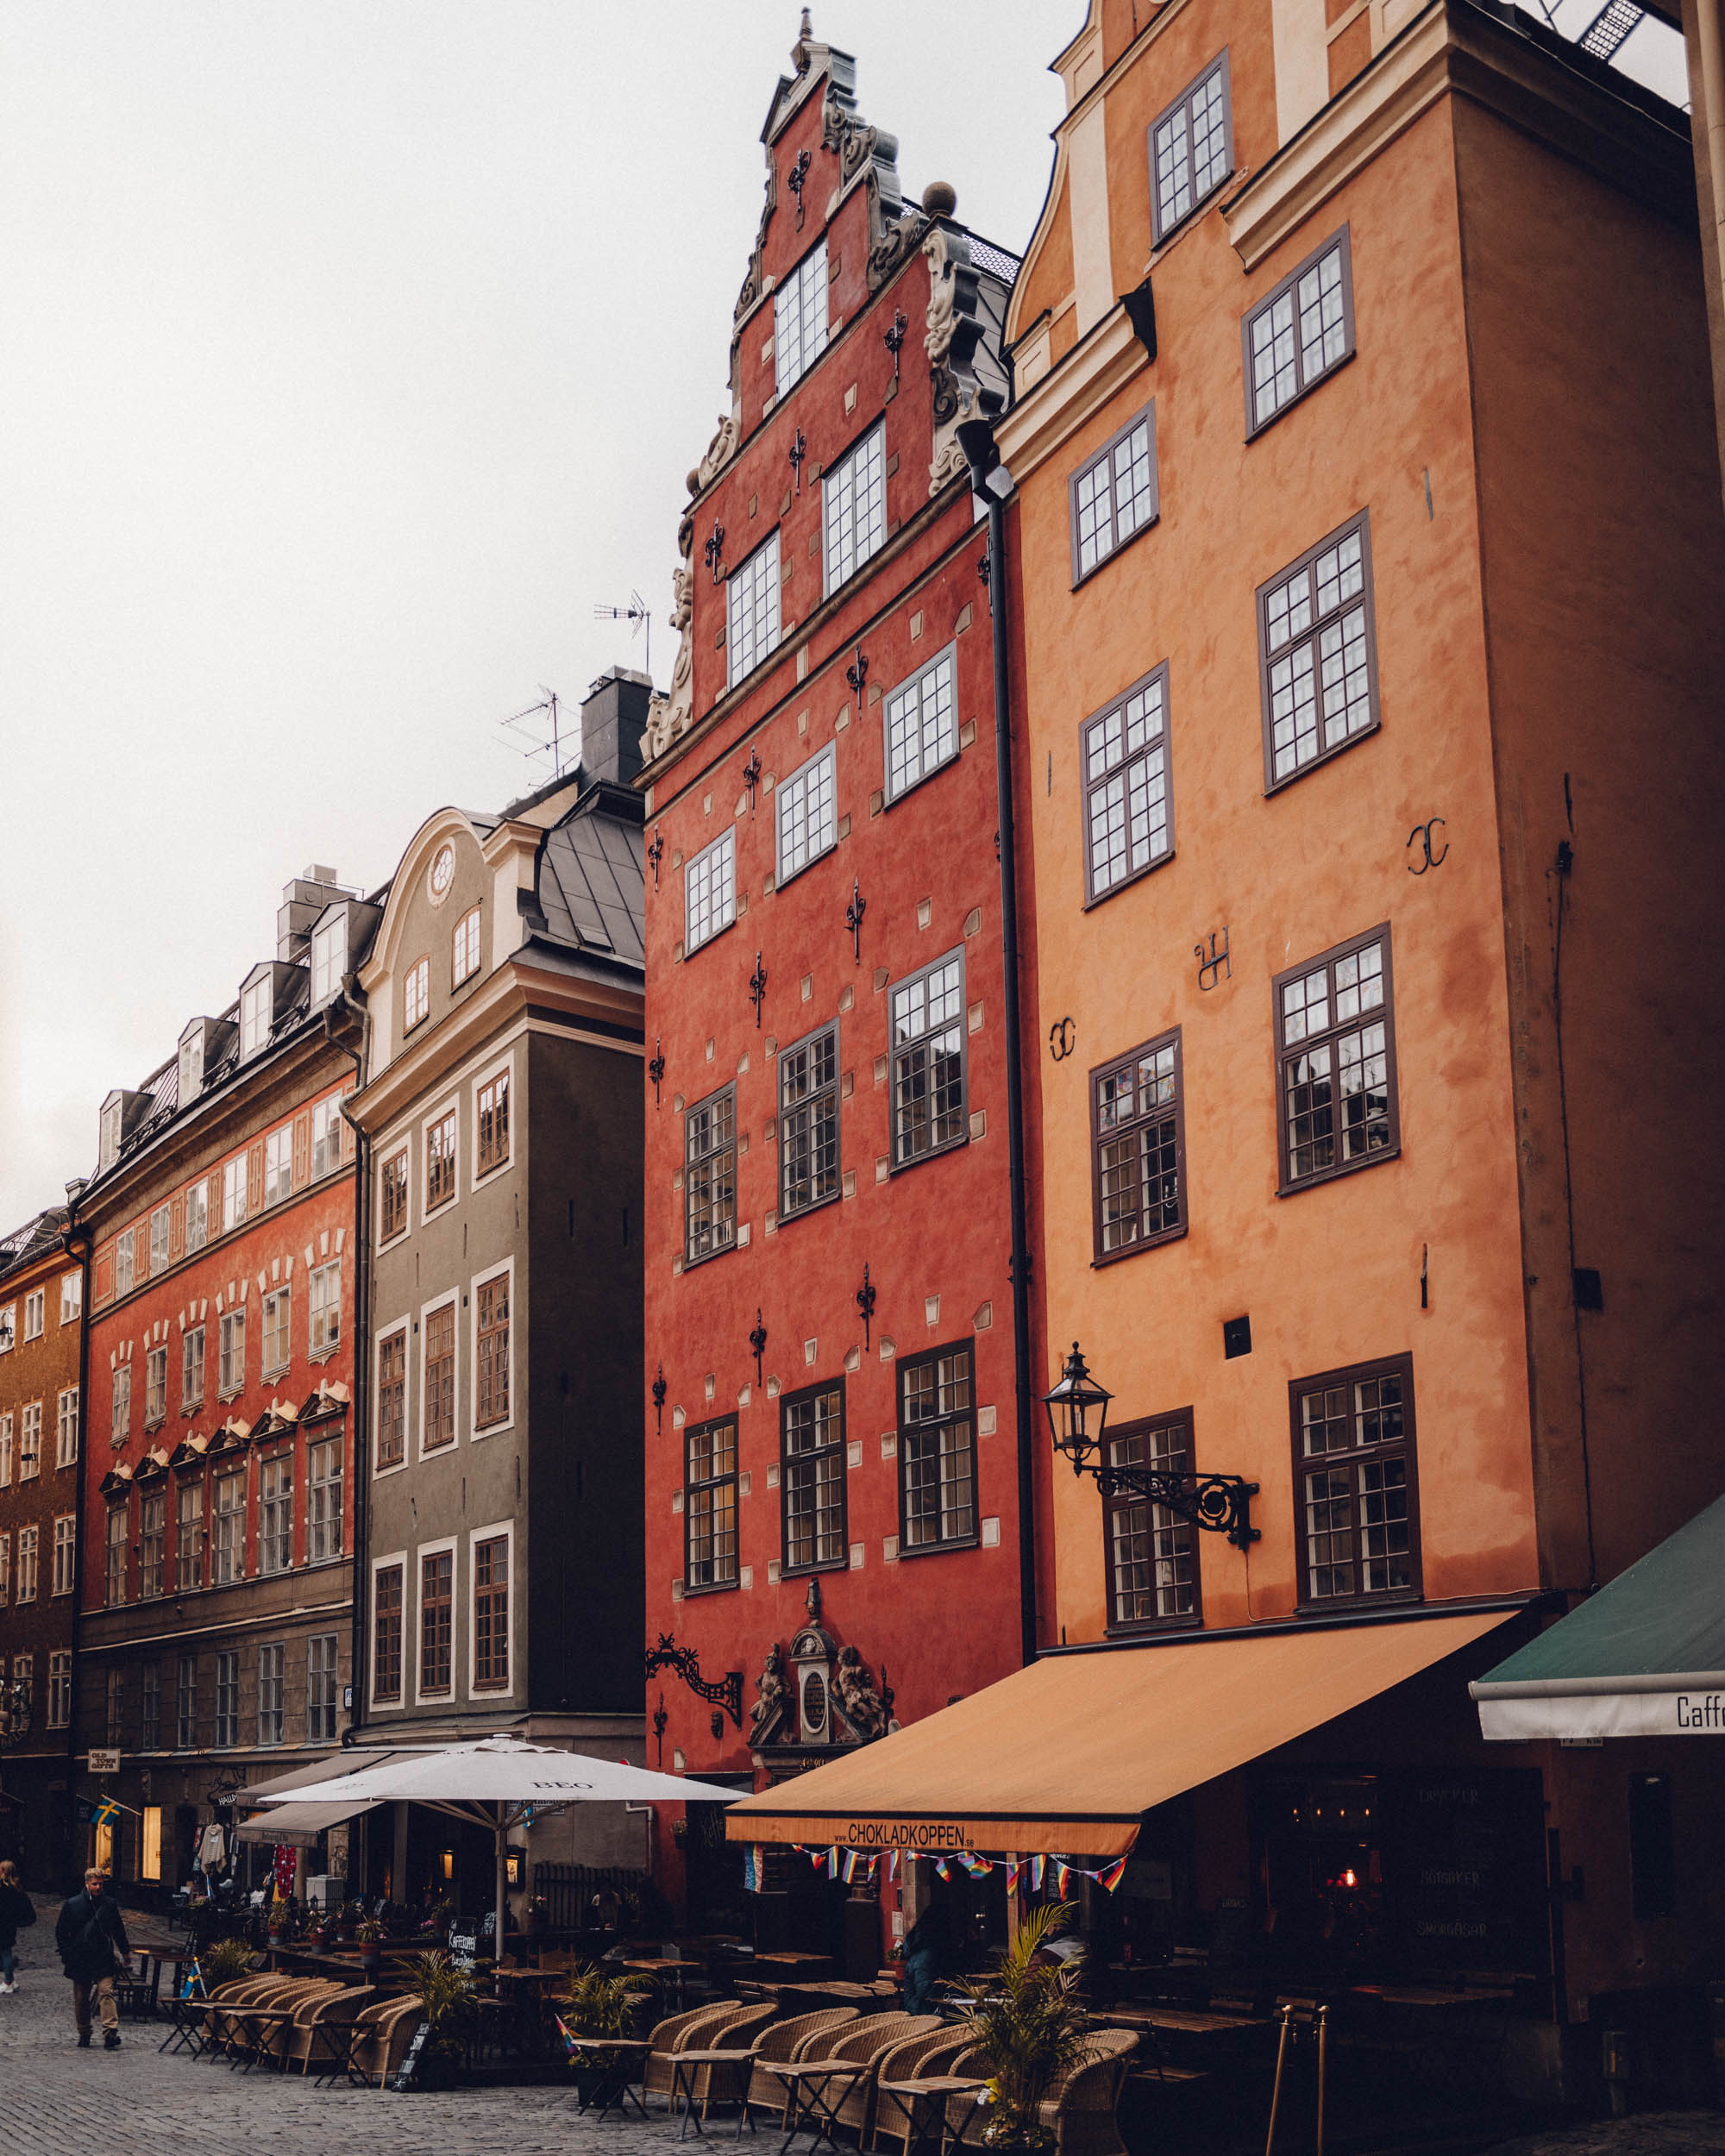 Old town Gamla Stan in Stockholm, Sweden - A Small Luxury Hotel